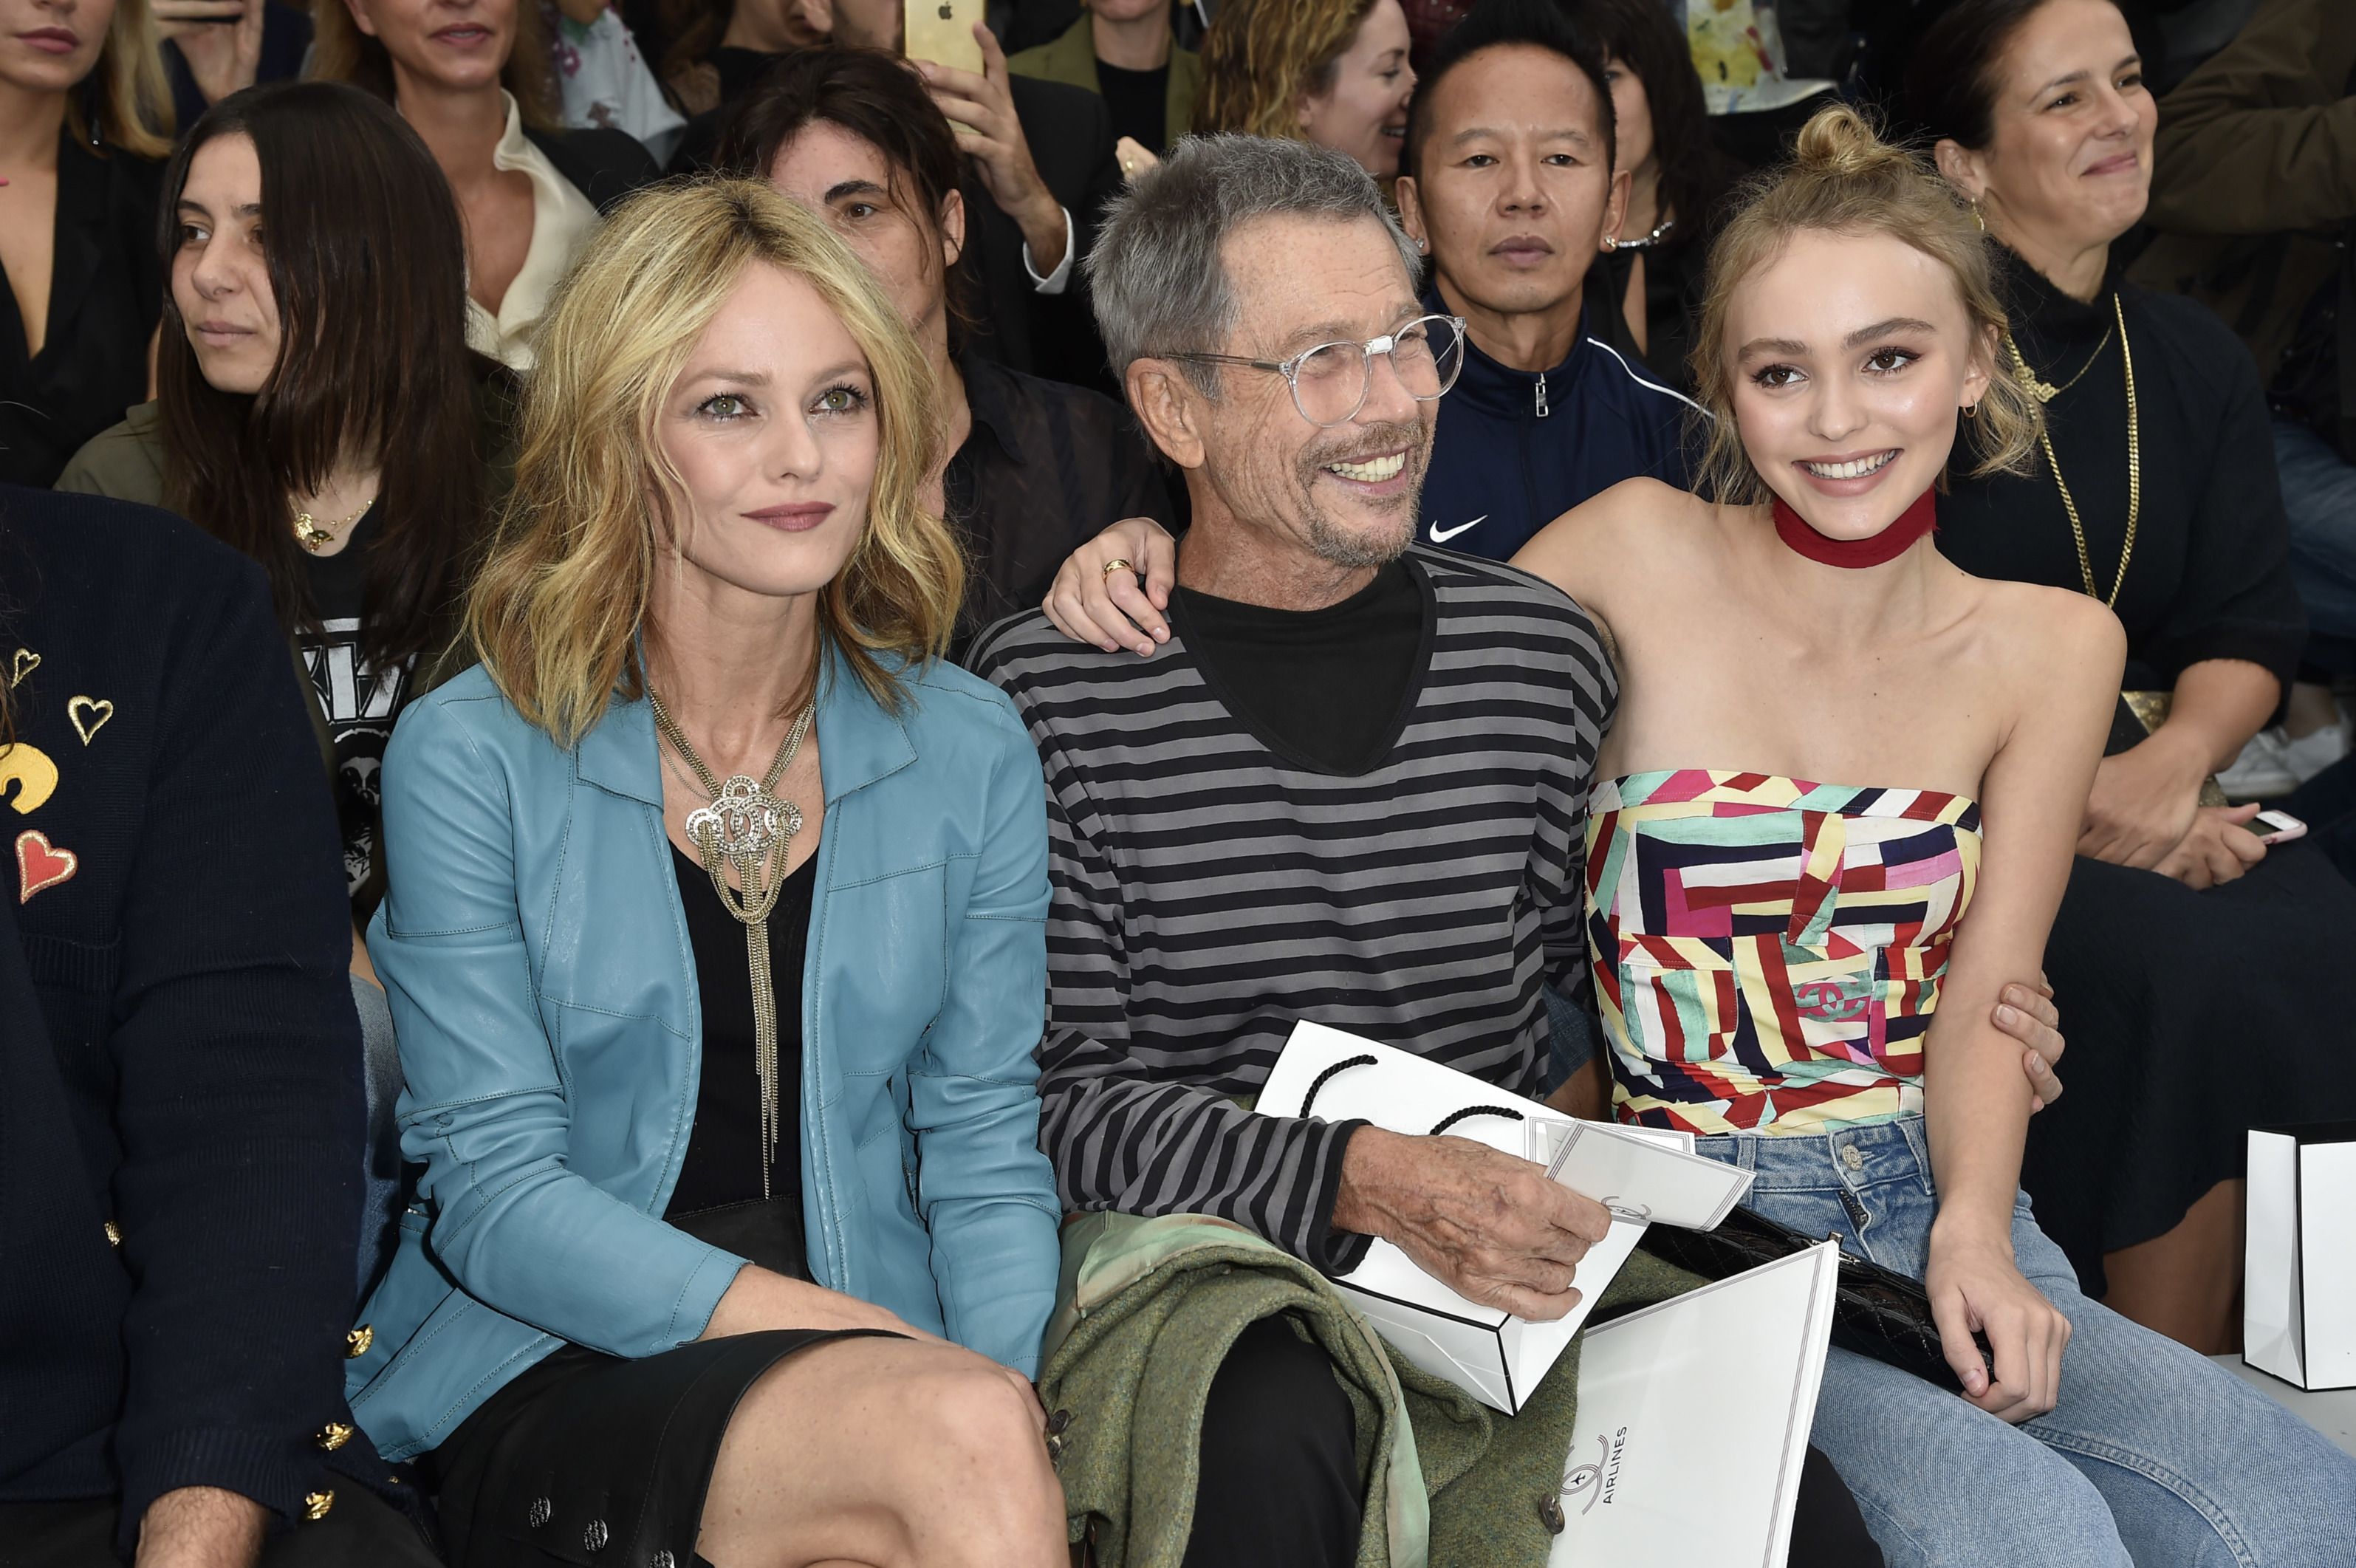 Vanessa Paradis, Lily Rose Depp & Jean-Paul Goude at the 2015 Chanel Paris Fashion Week